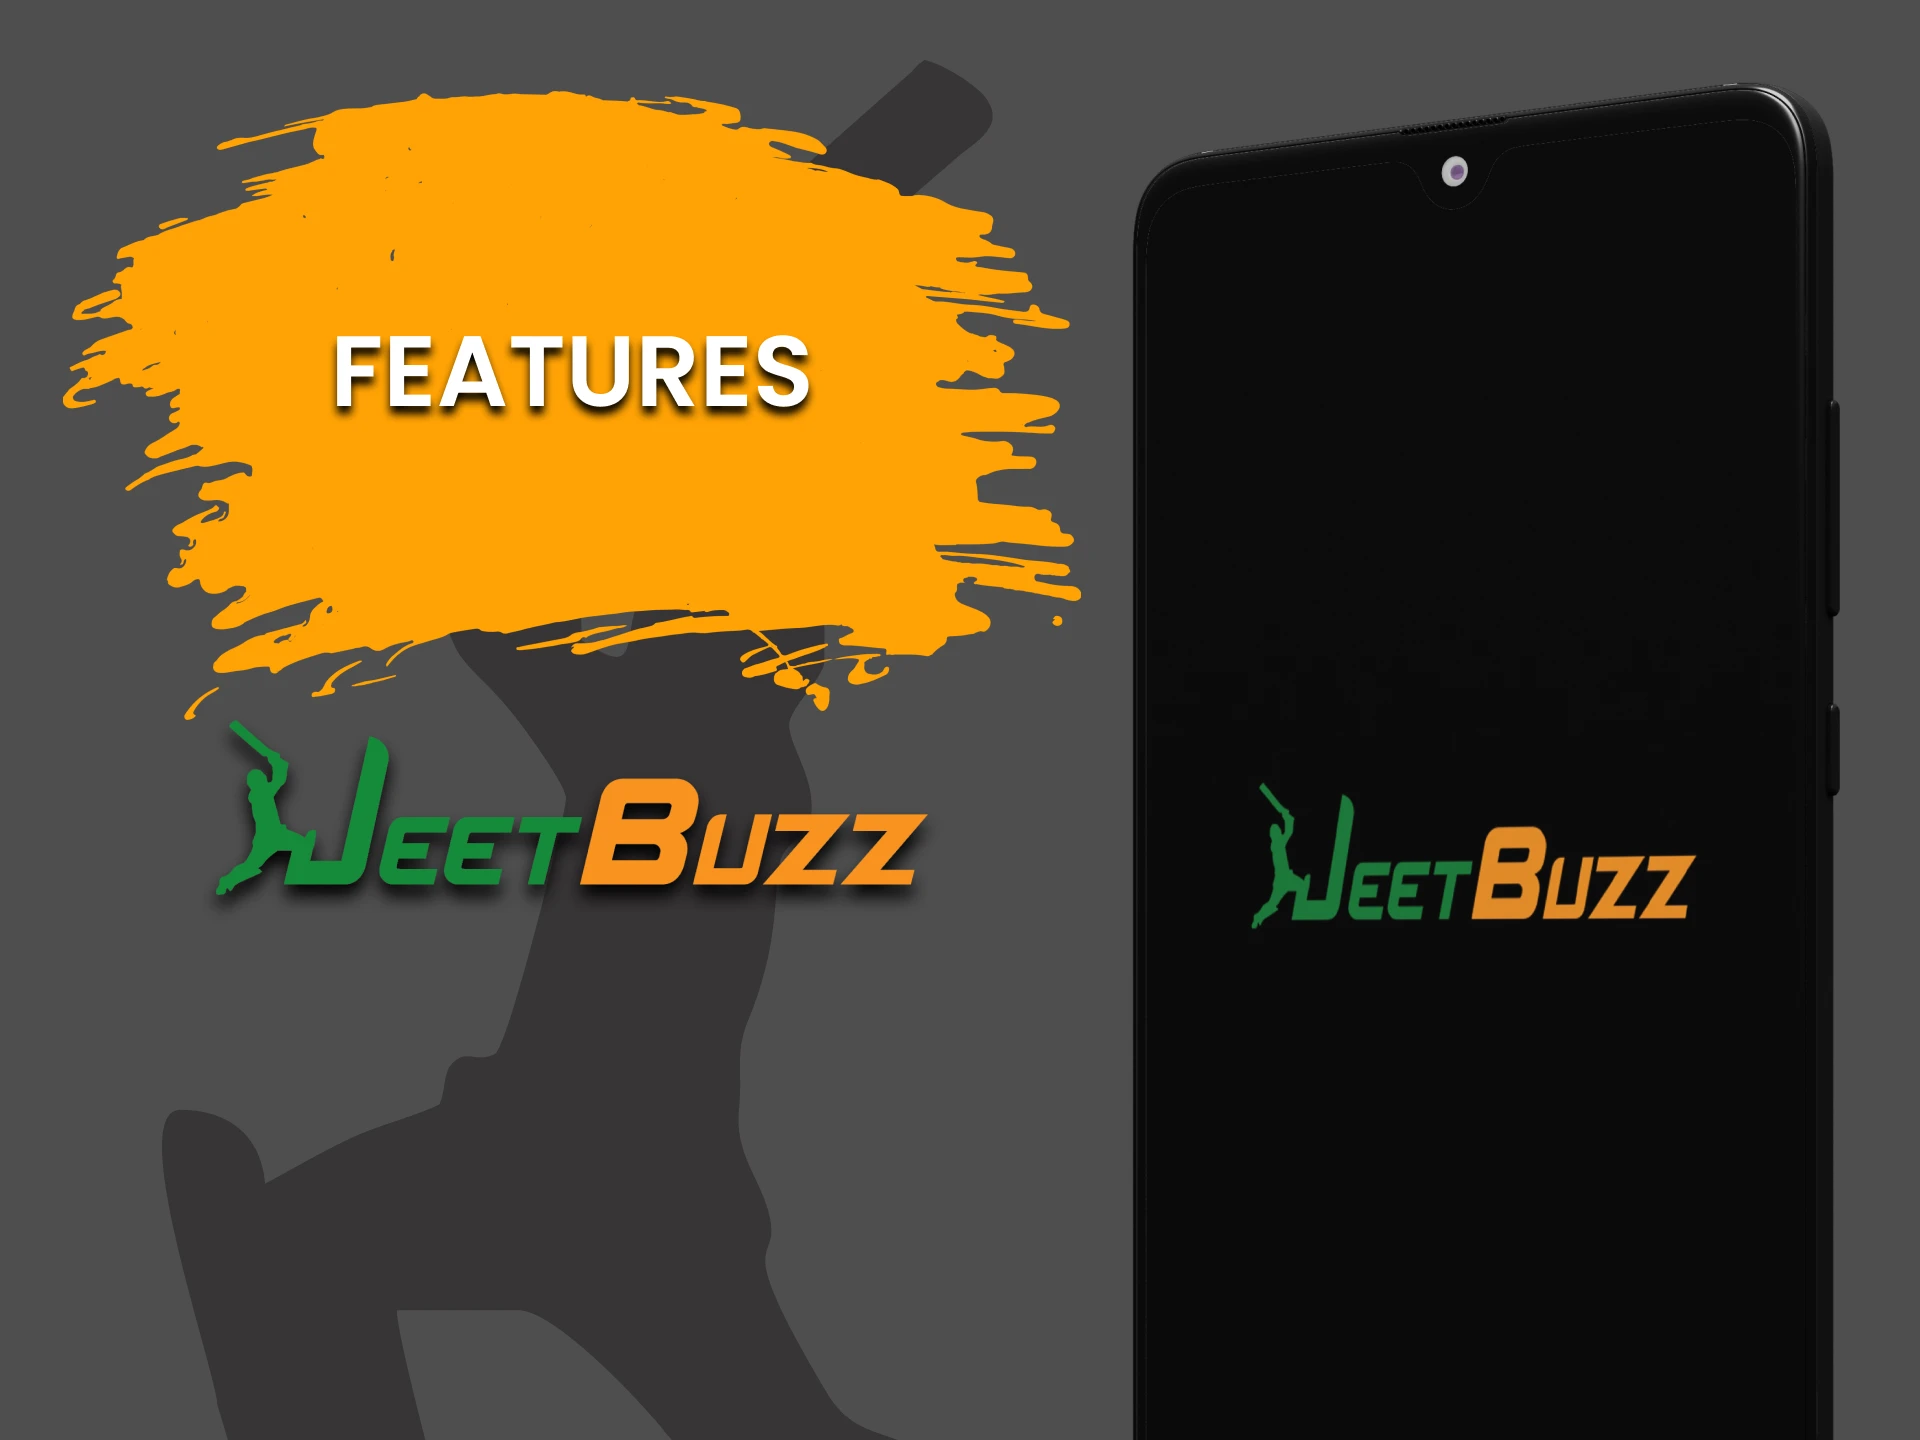 In the future, the JeetBuzz application is expected to be improved.